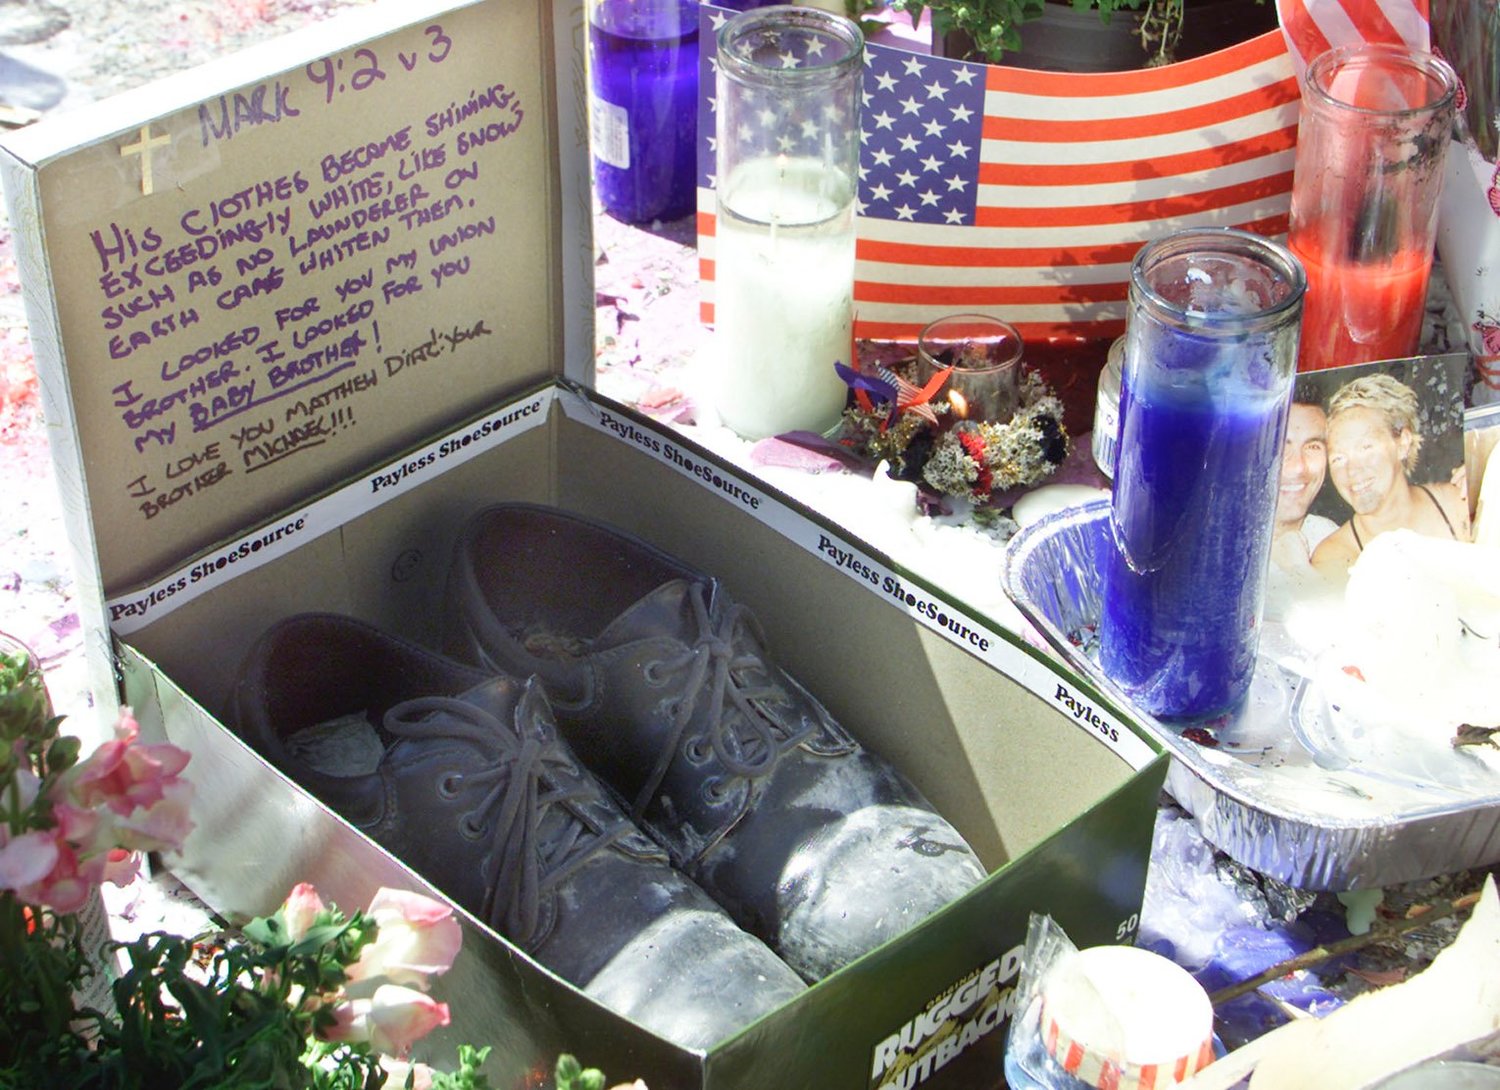 A pair of shoes are left on Sept. 17, 2001, in New York’s Union Square with a message of love from a family member. An extensive memorial was set in the area in memory of the victims of the Sept. 11 World Trade Center terrorist attacks.